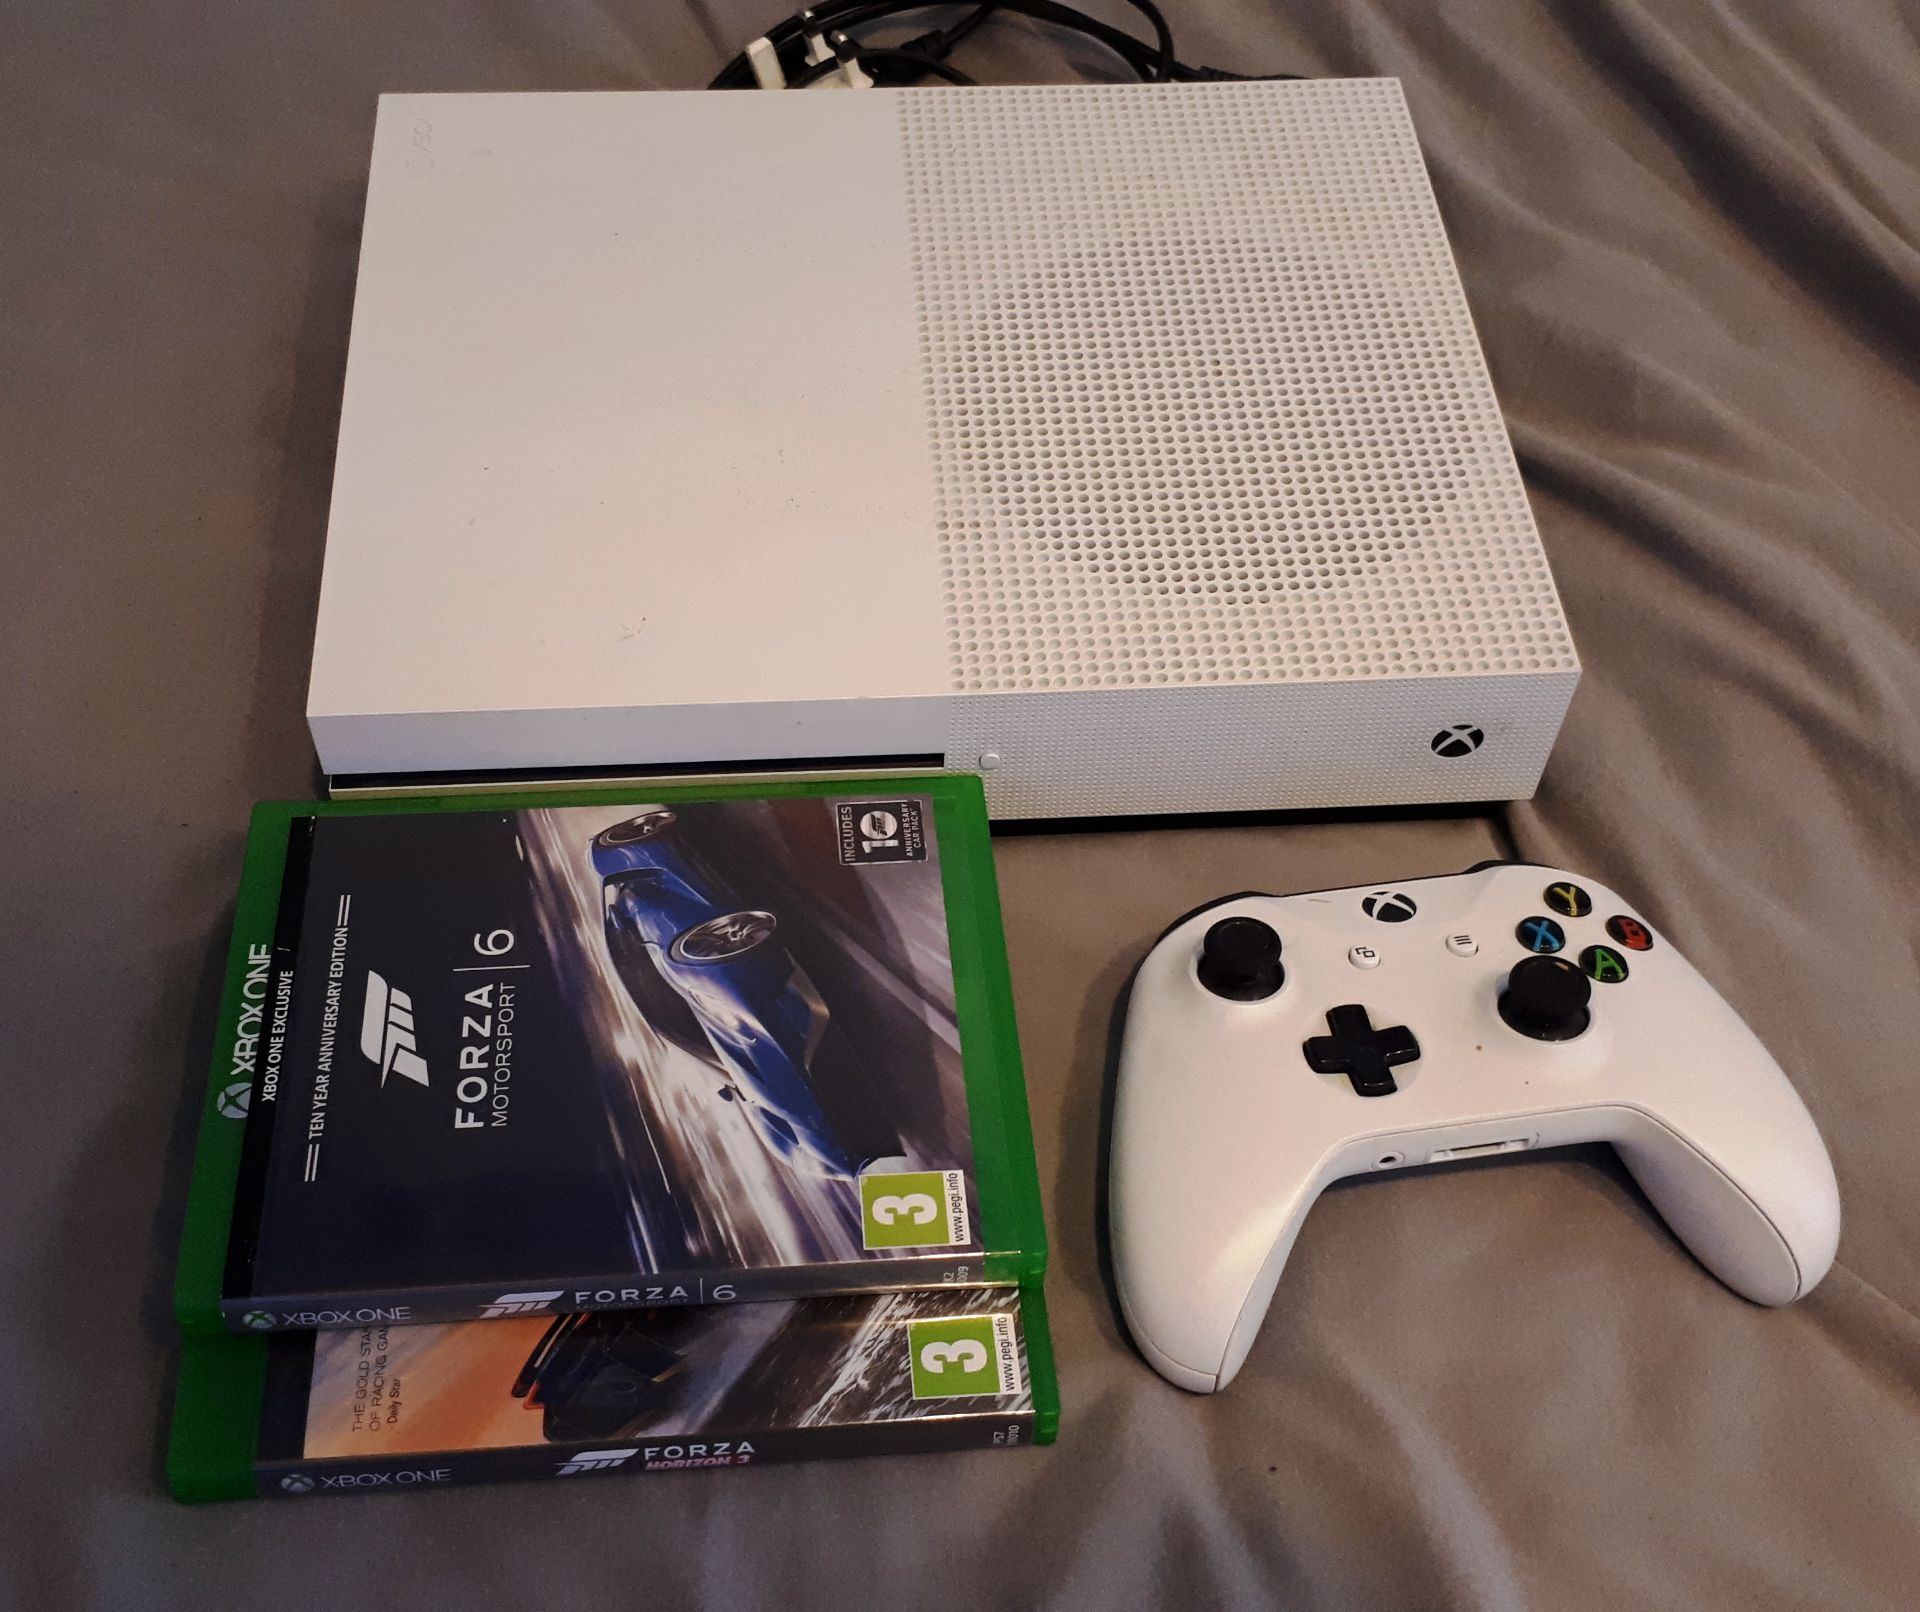 Xbox One S console (Model 1681), with wireless controller, and 2 x Games: Forza Horizon 3, and Forza